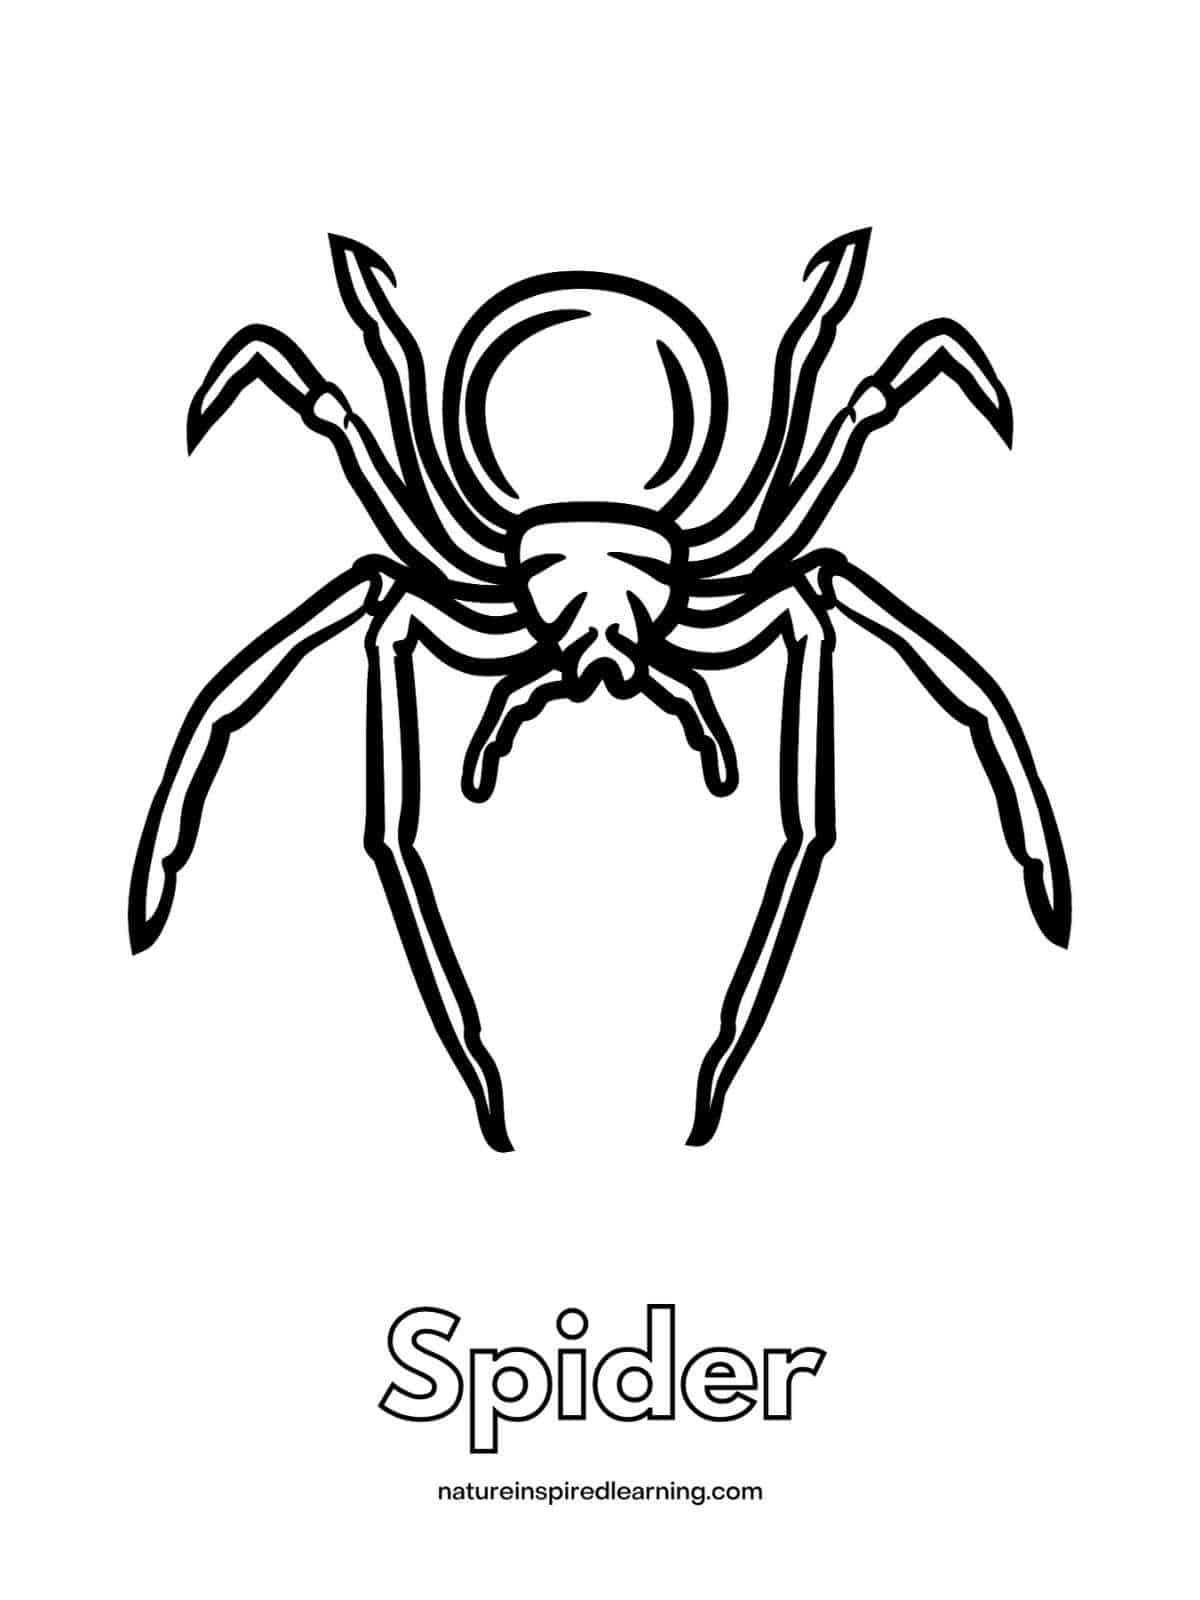 sheet with black and white spider over the word Spider written in outline form